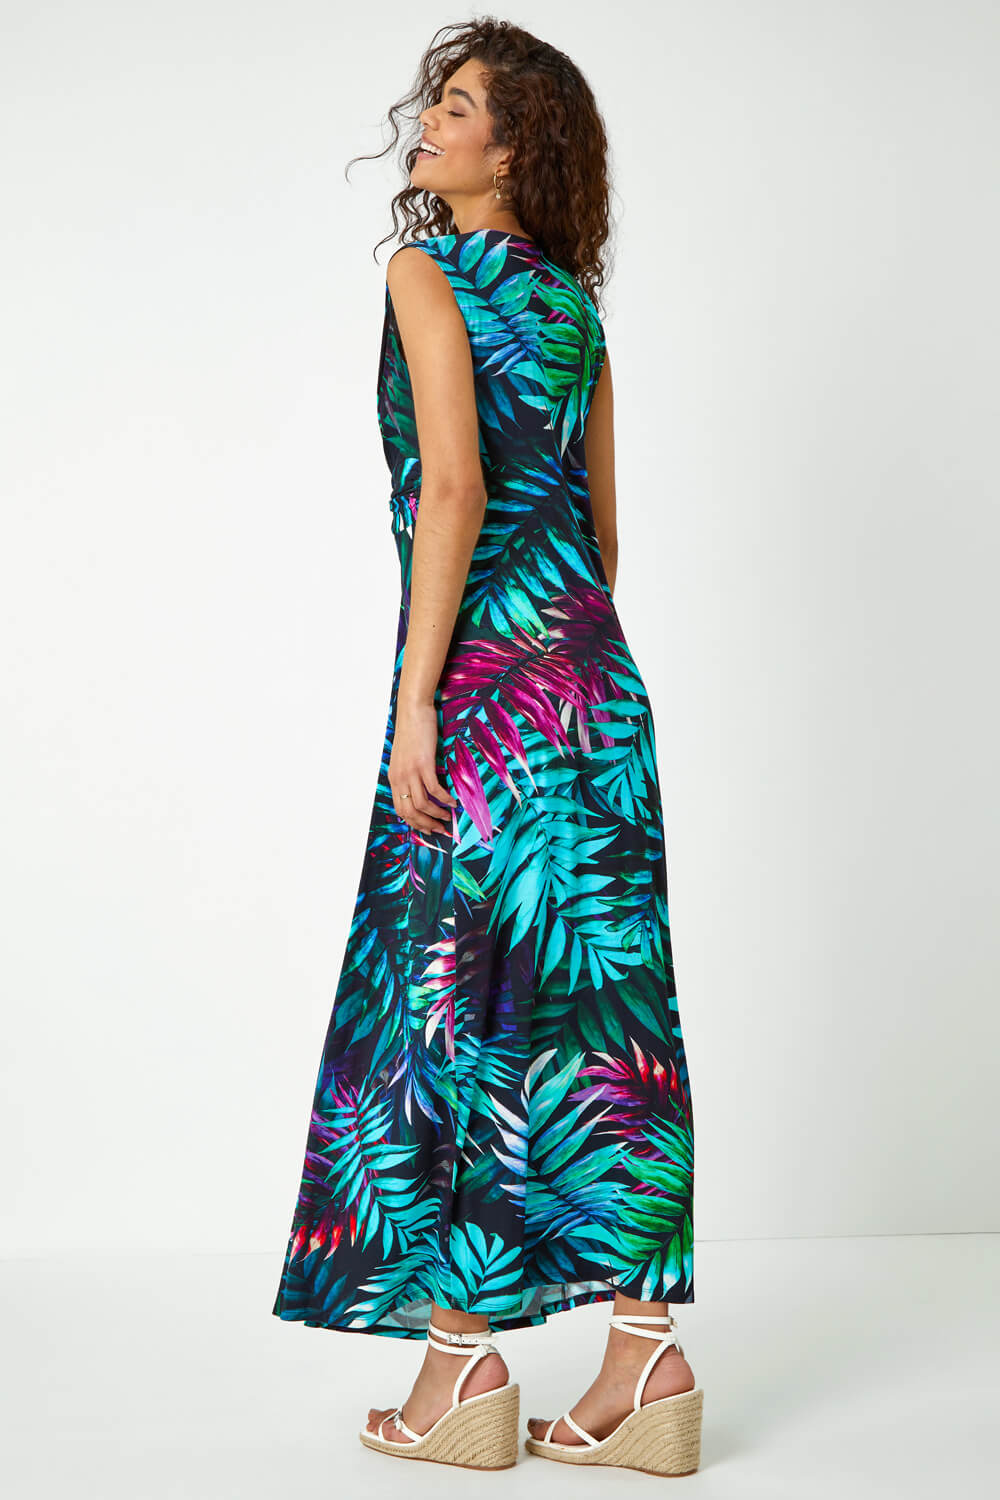 Turquoise Tropical Print Maxi Dress, Image 3 of 6